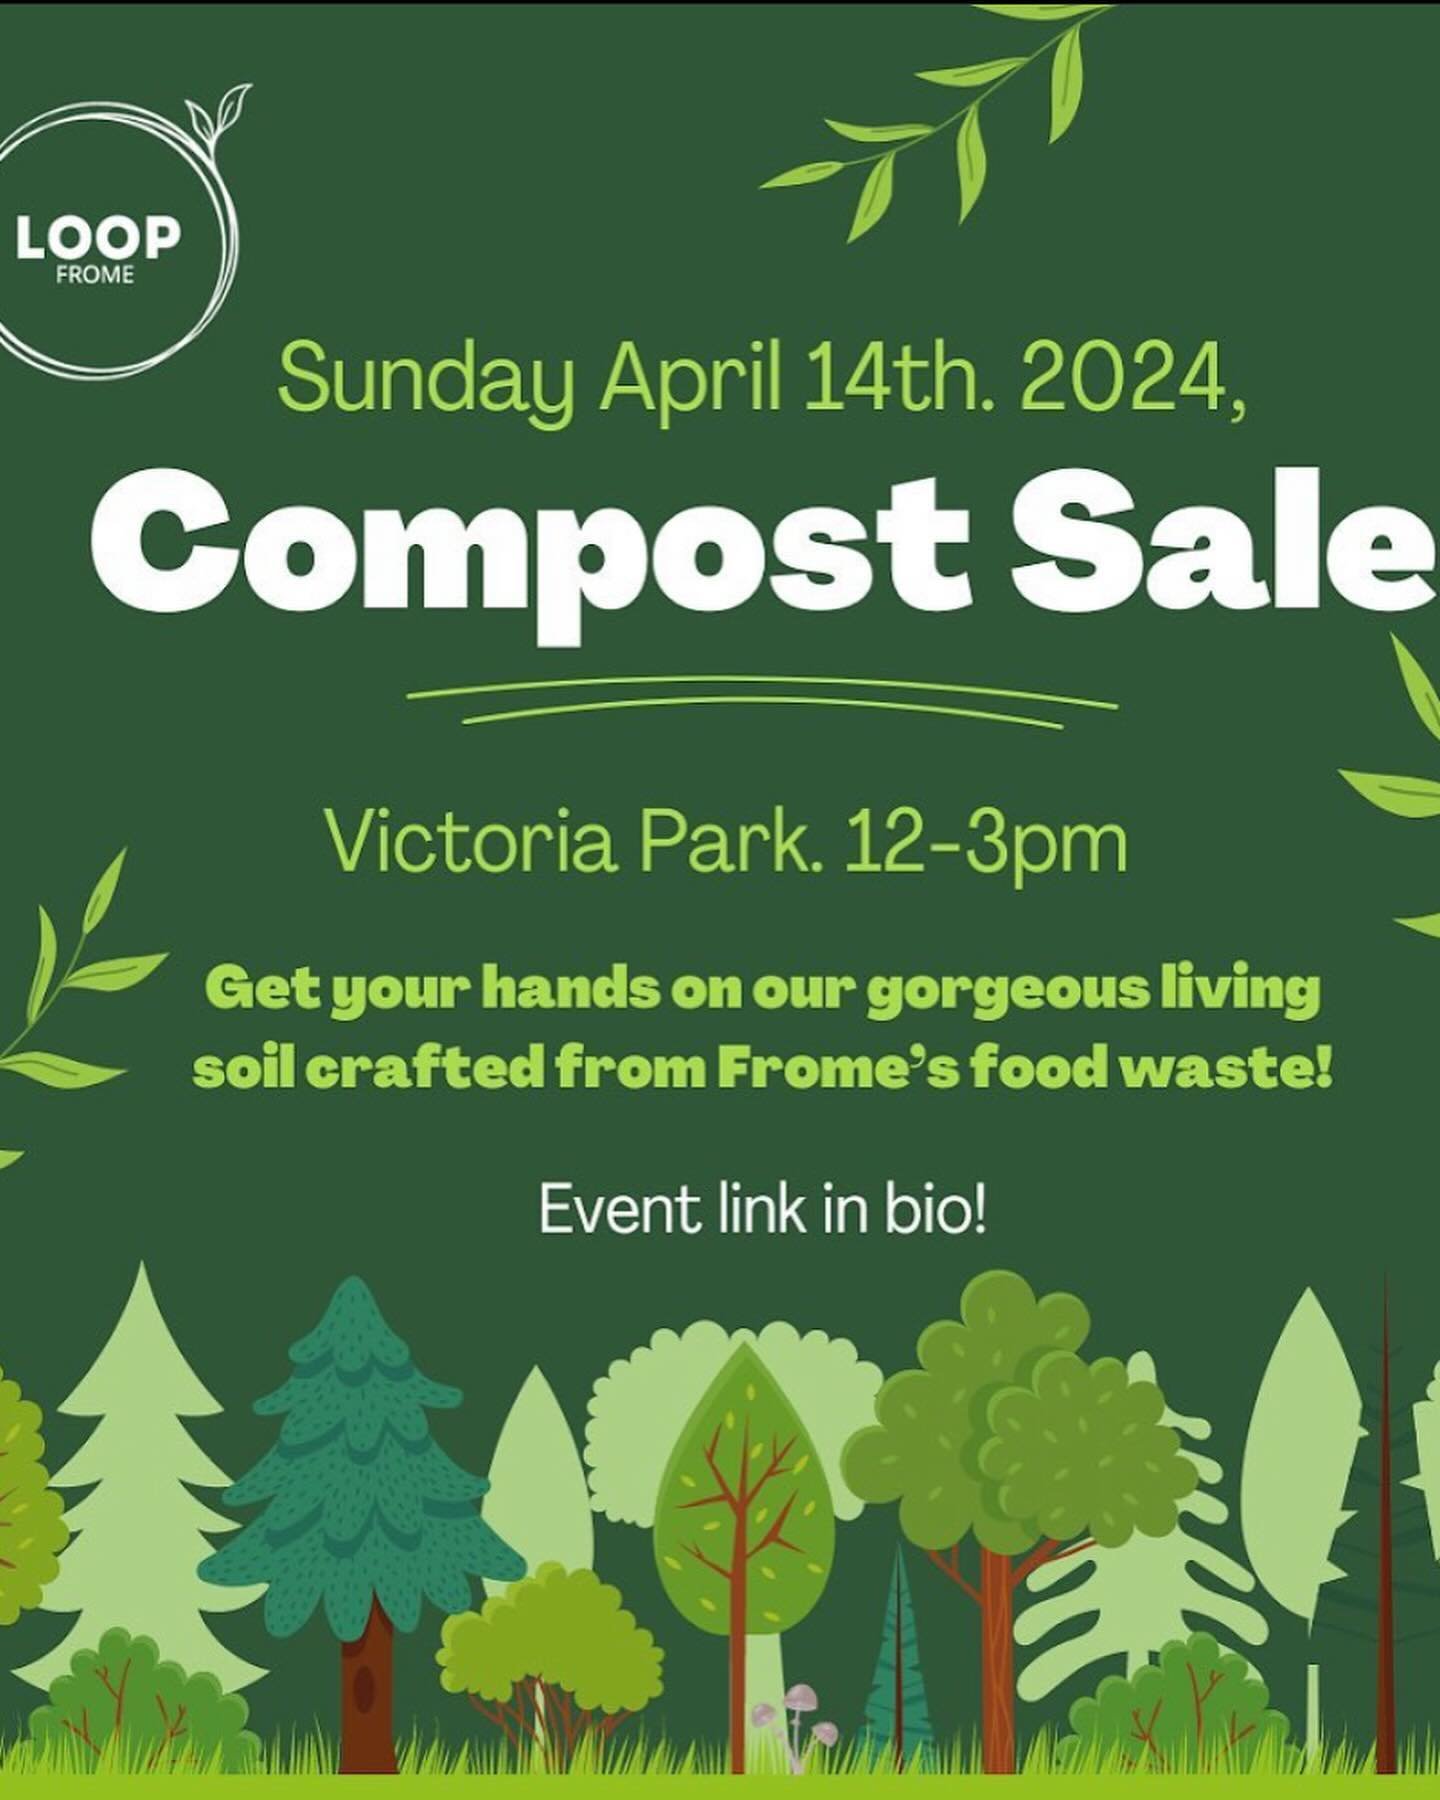 Shout out to put Mycelium compost revolutionaries in Frome @loopfrome preparing for their community compost sale tomorrow 🤎 they couldn't have chosen a better time for it with the weather heating up like this photosynthesis 🌱  is kicking off everyw